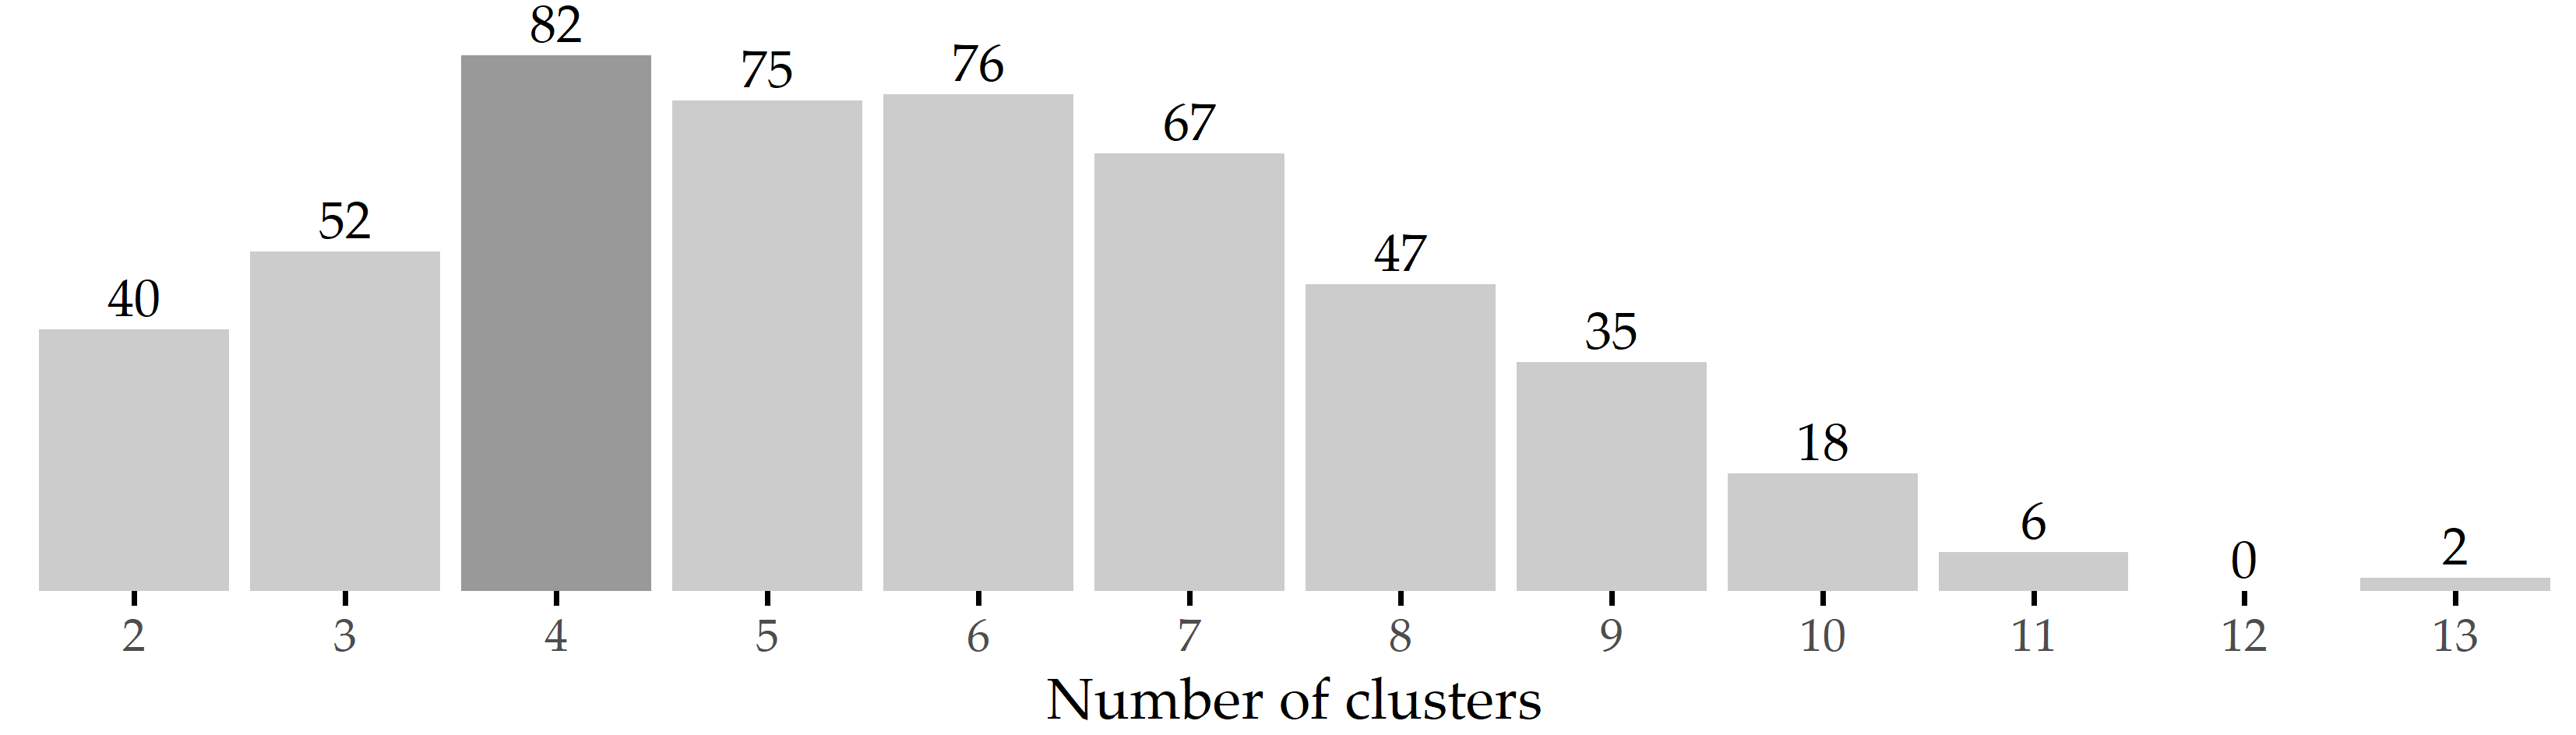 Results of internal validation. Bars show the frequency of the number of clusters generated by X-means for 500 bootstrap samples. The most common cluster number was 4, which occurred in 82 samples (16.4%).